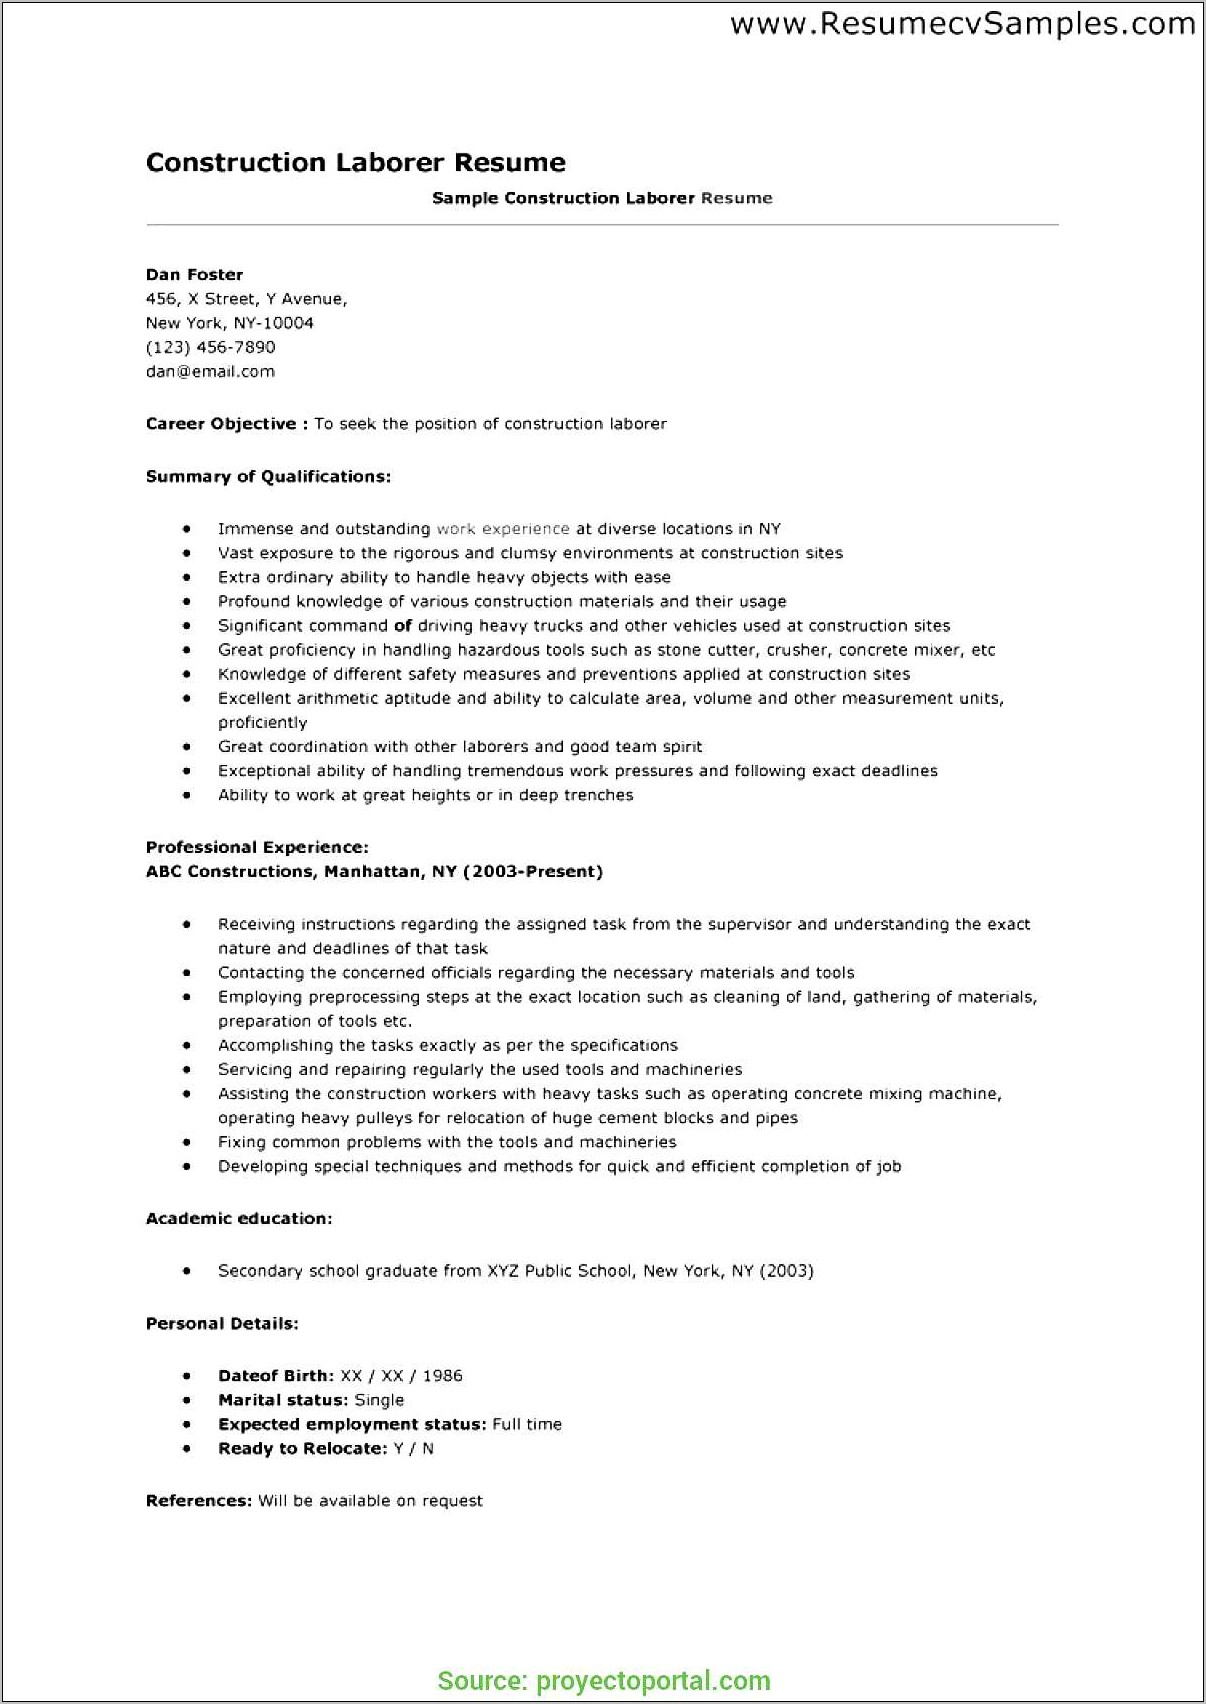 Resume Examples Construction Laborer